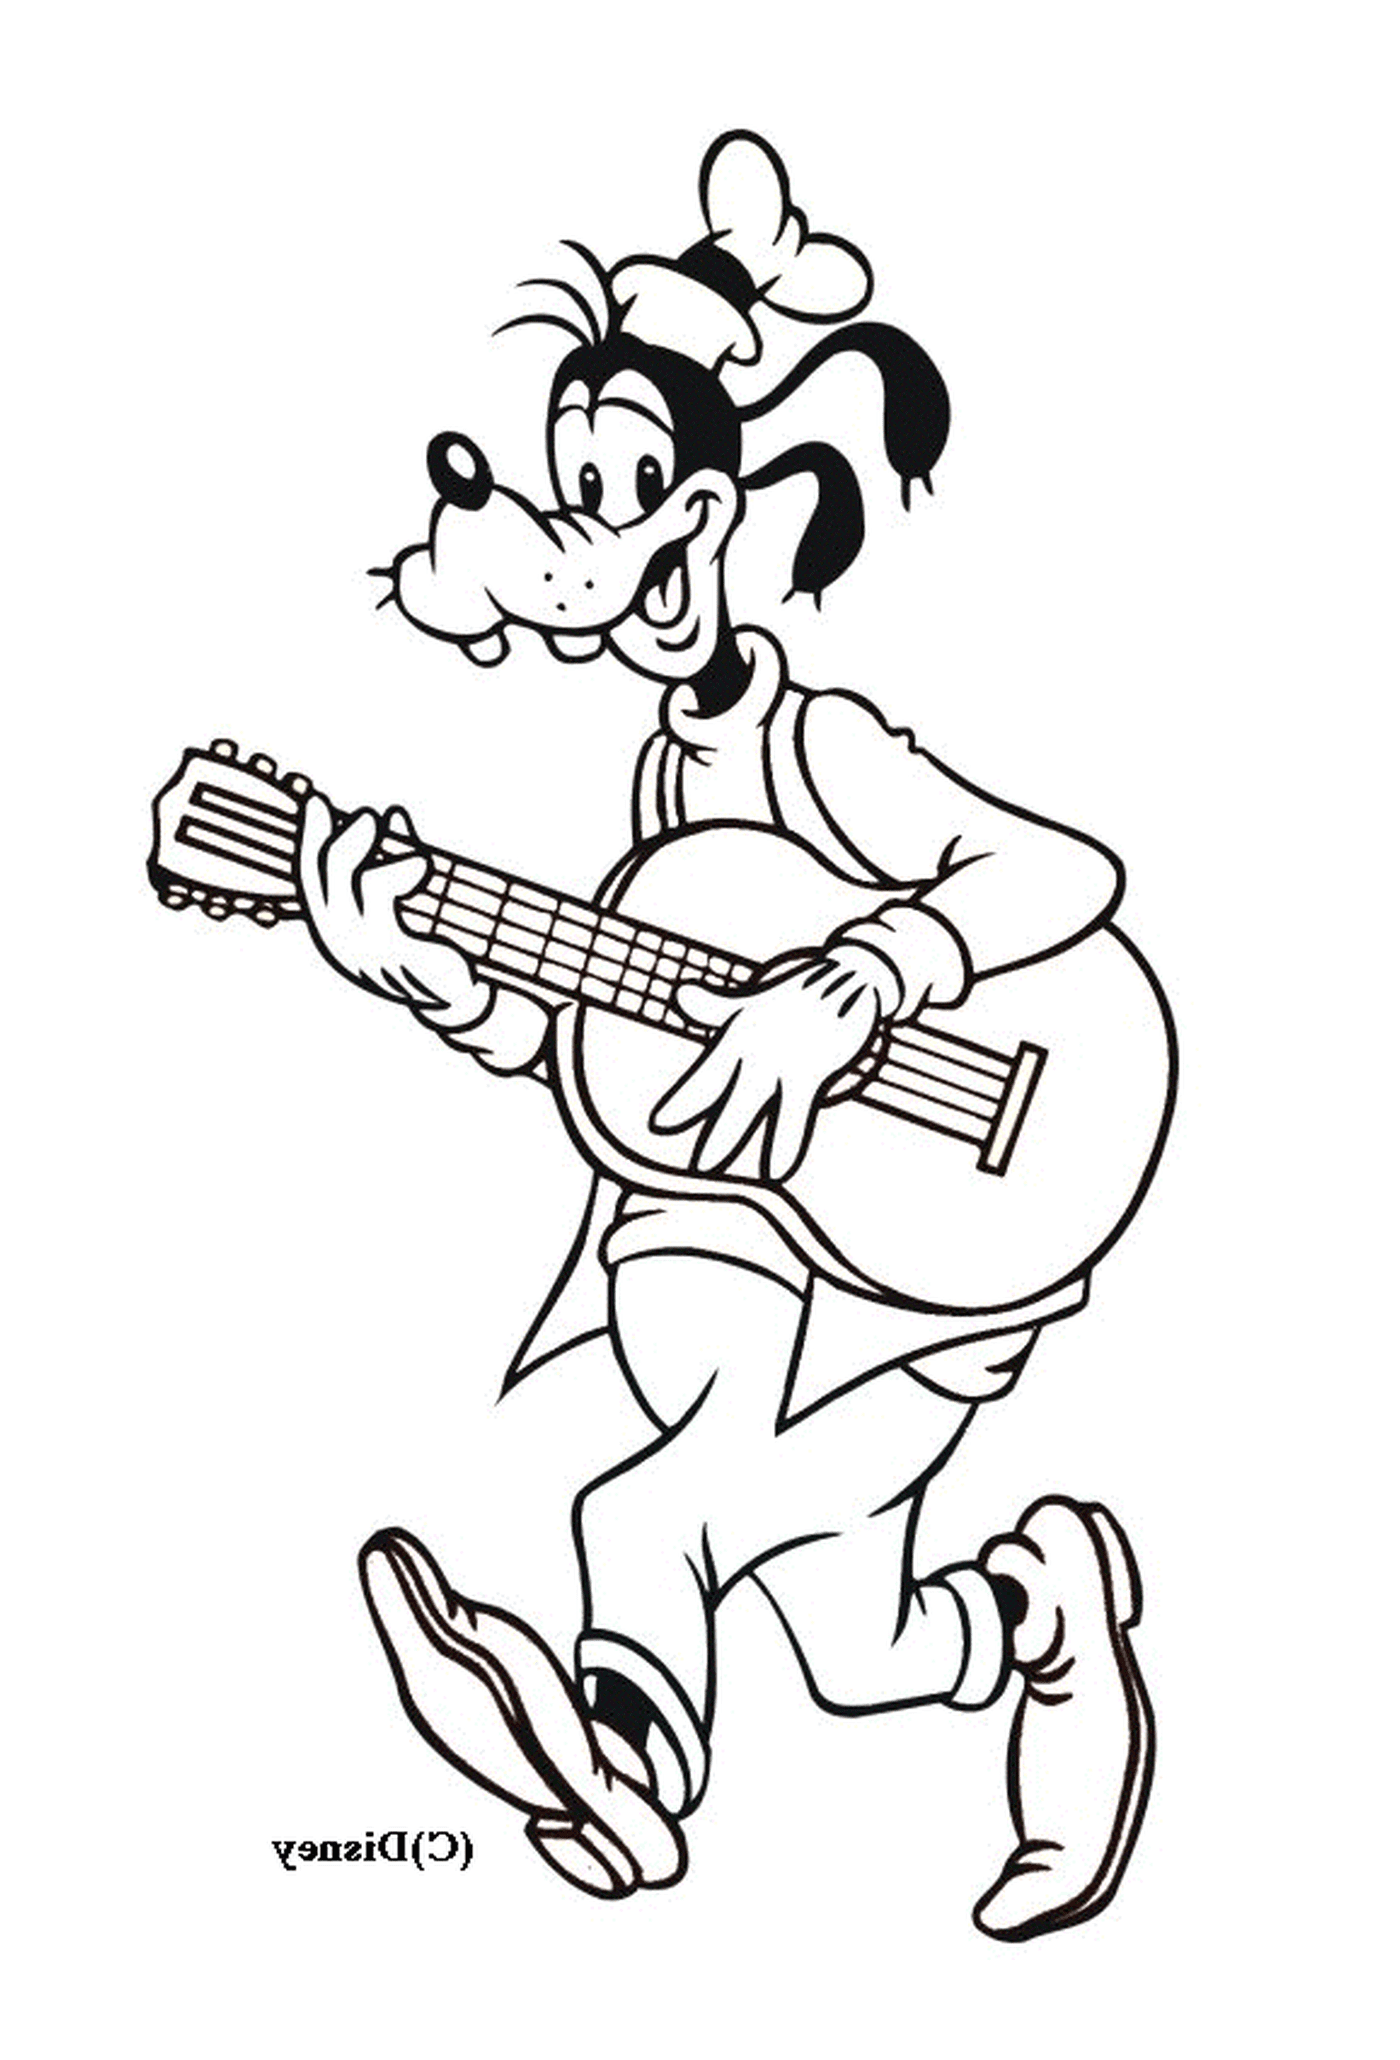  Dingo plays guitar while standing 